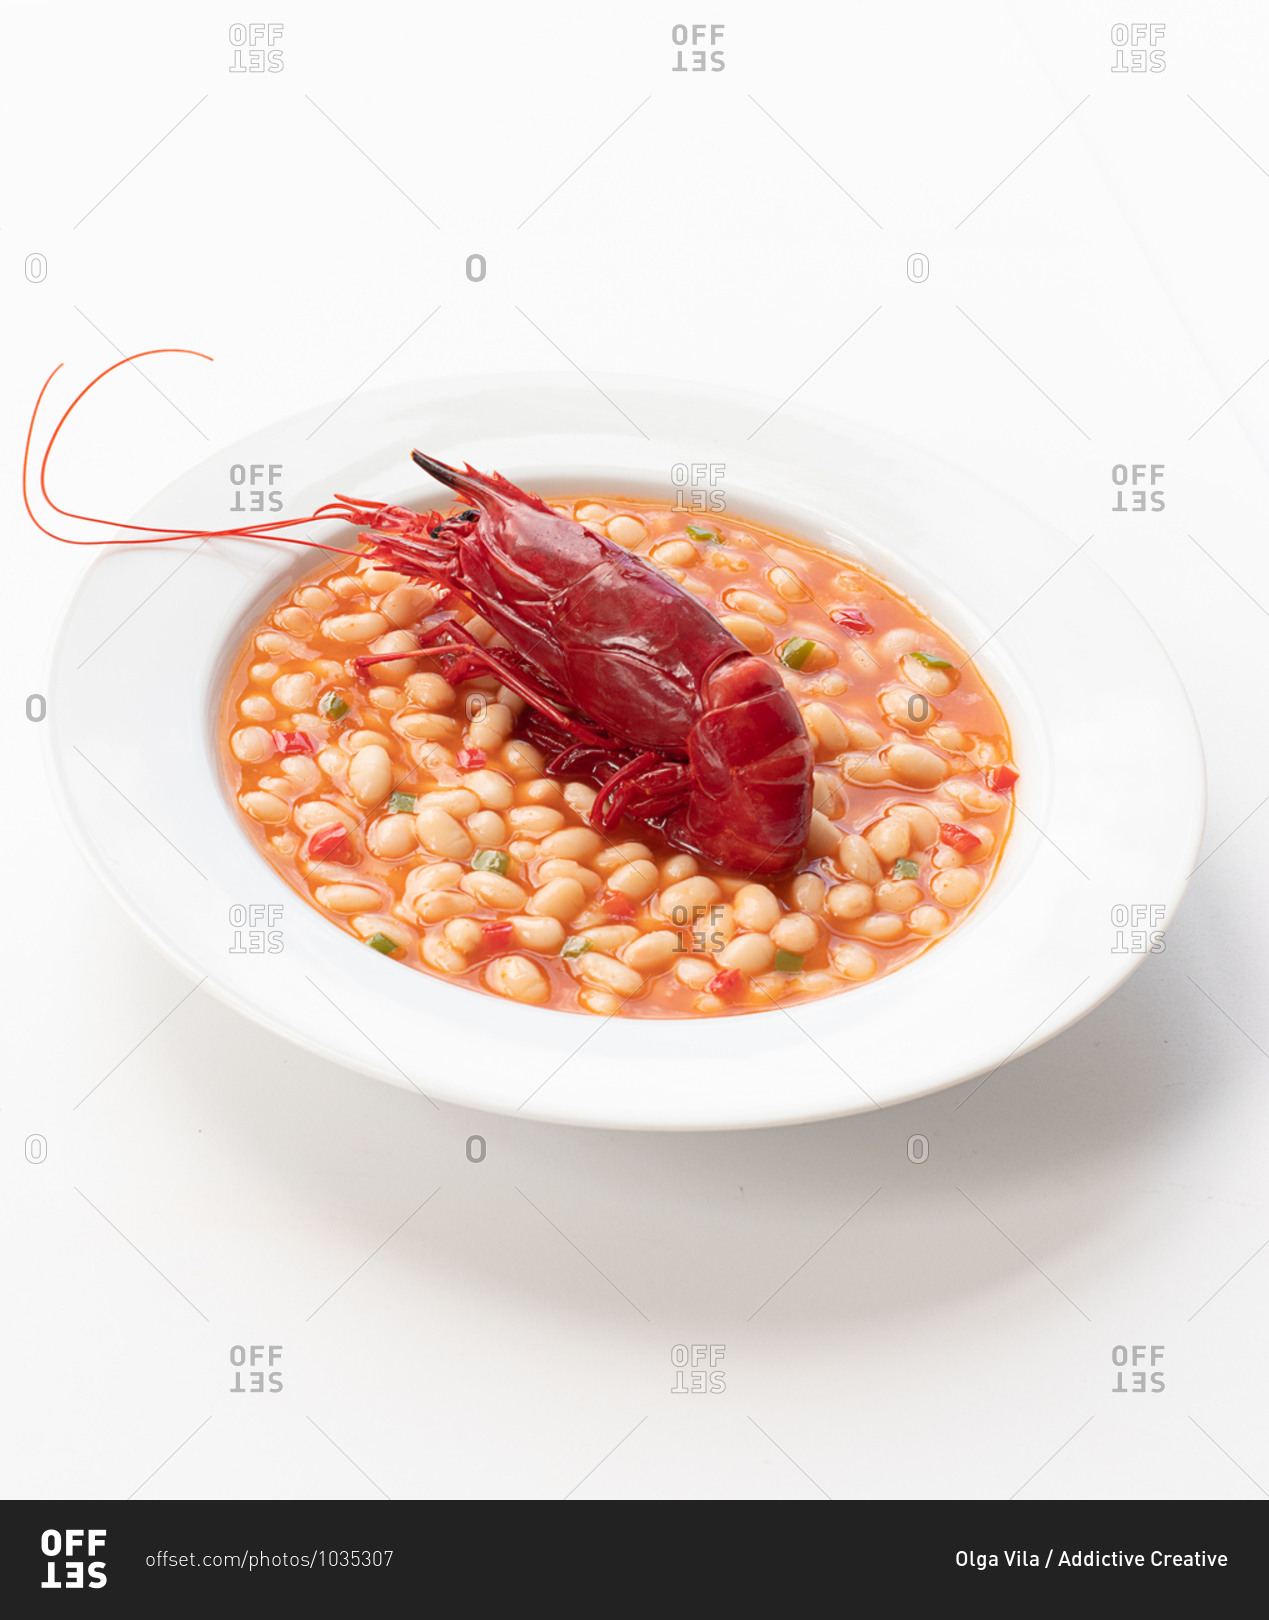 High angle of red boiled crawfish placed in bowl with beans in tomato sauce and served on table in cafe